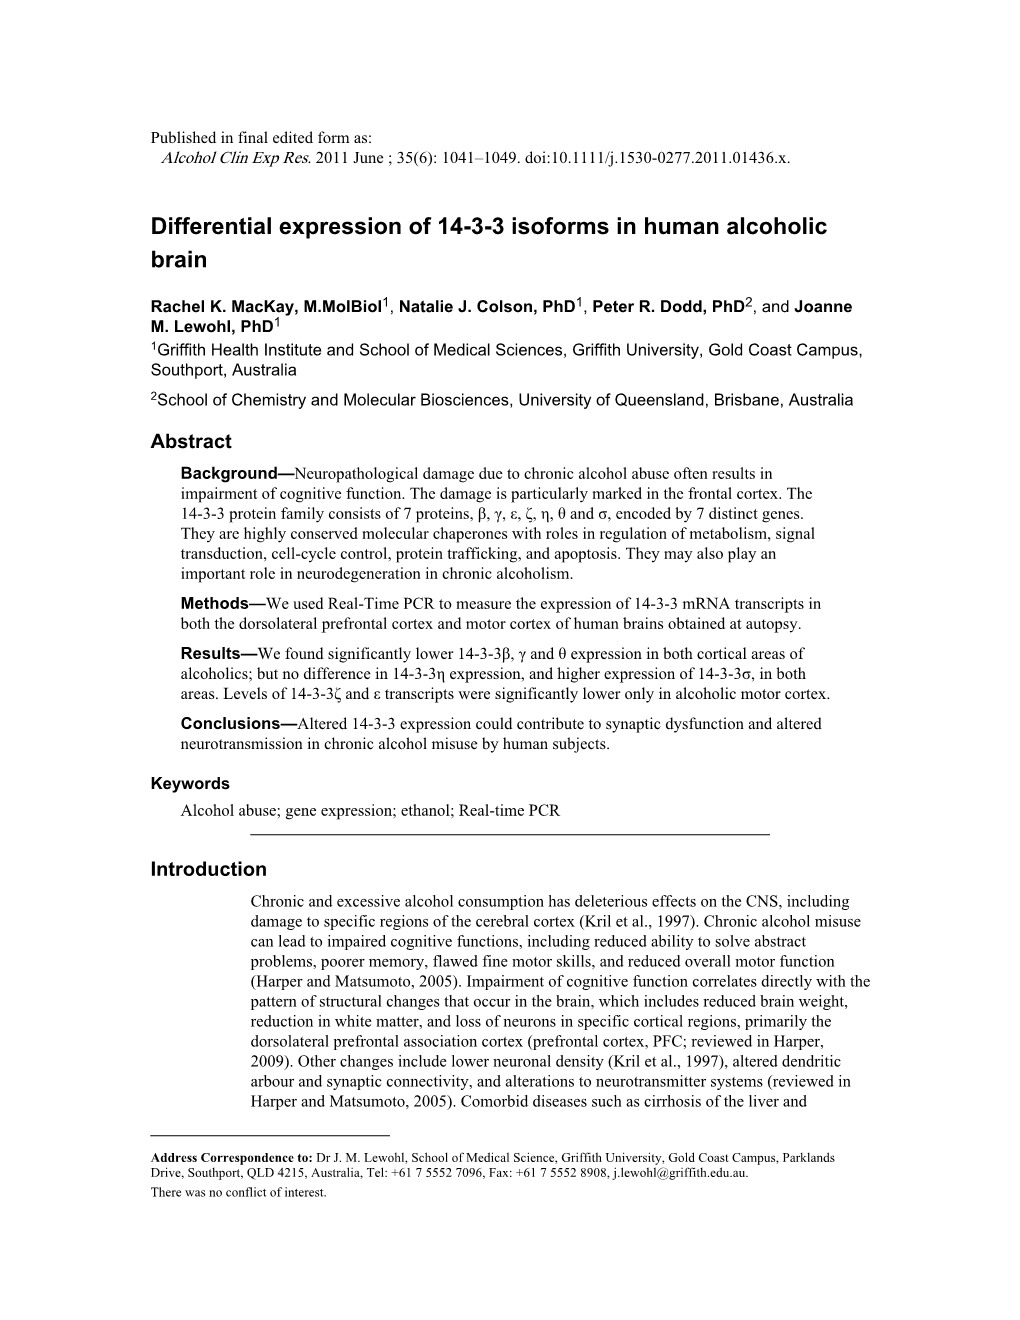 Differential Expression of 14-3-3 Isoforms in Human Alcoholic Brain